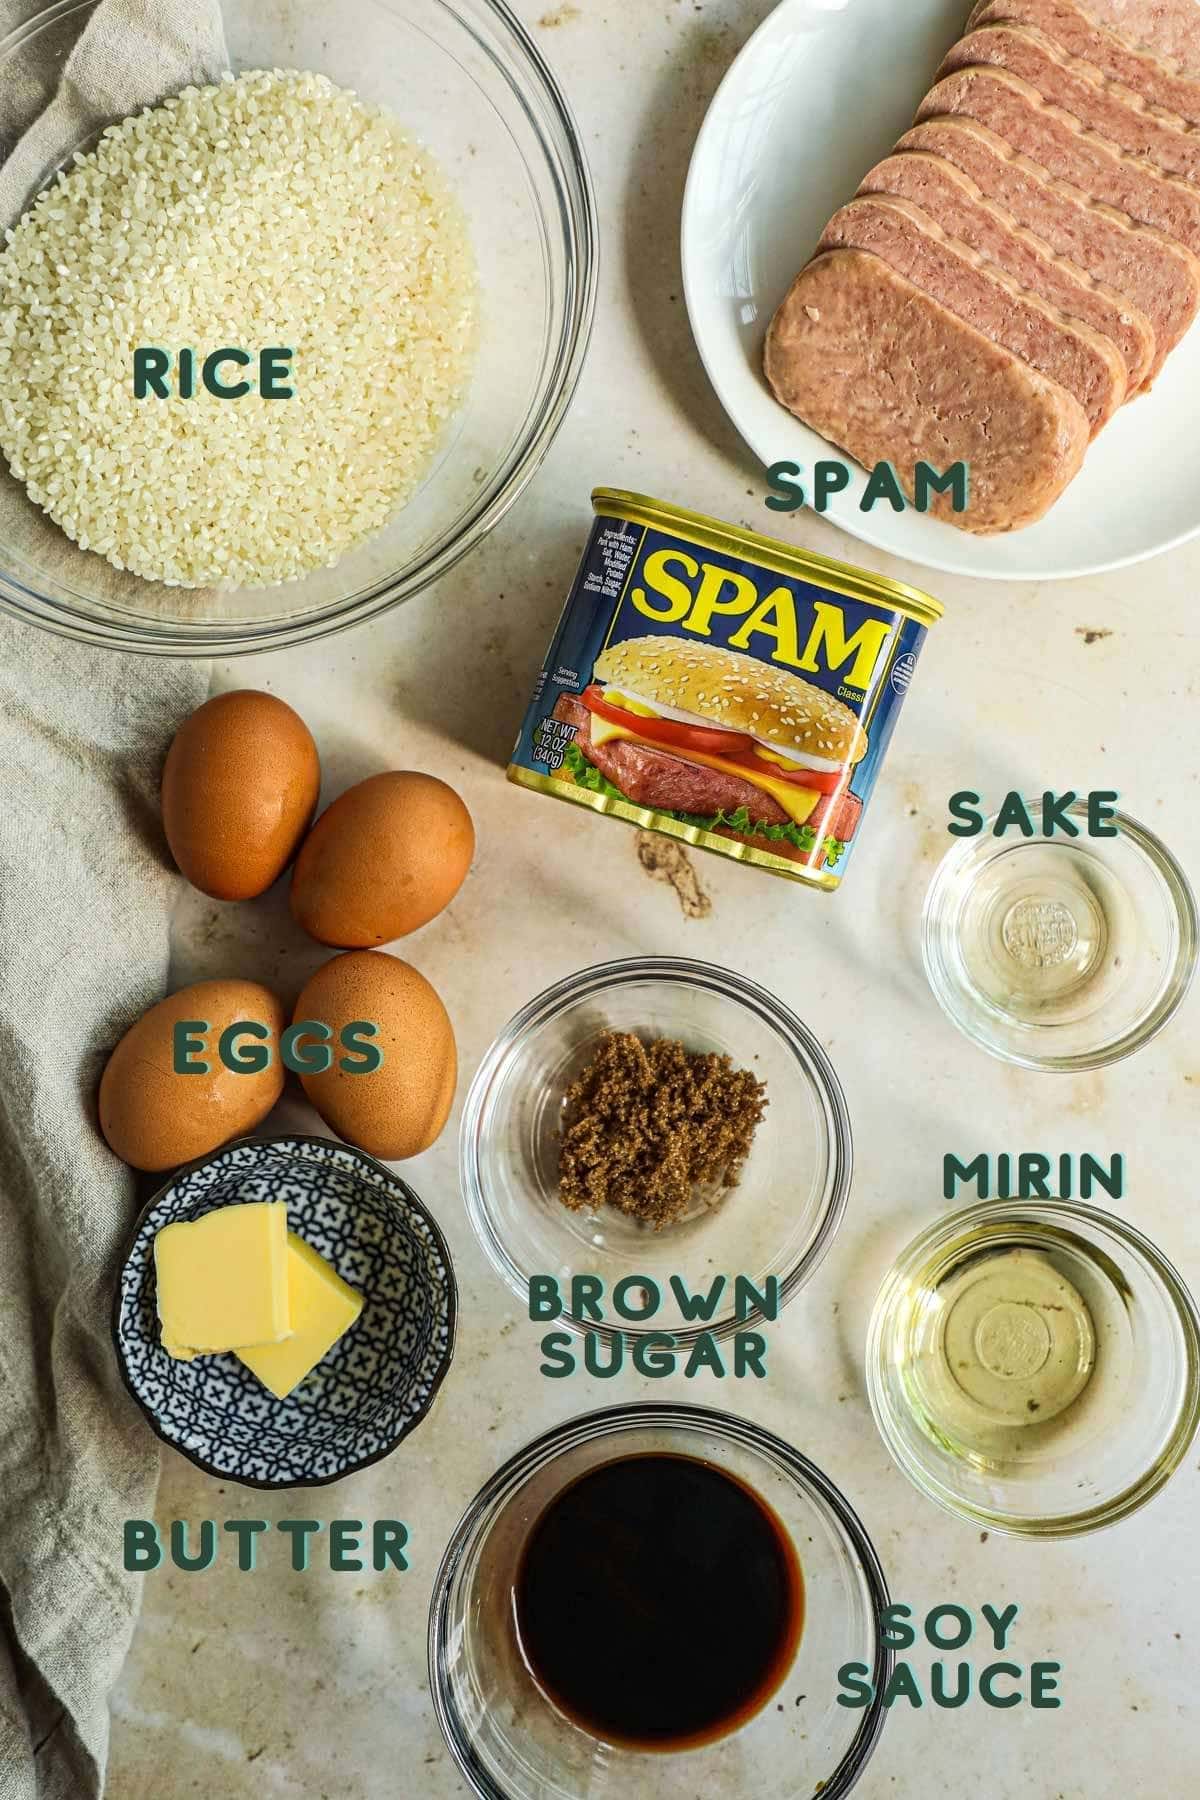 Ingredients to make fried SPAM, sunny side up eggs, and rice for breakfast.